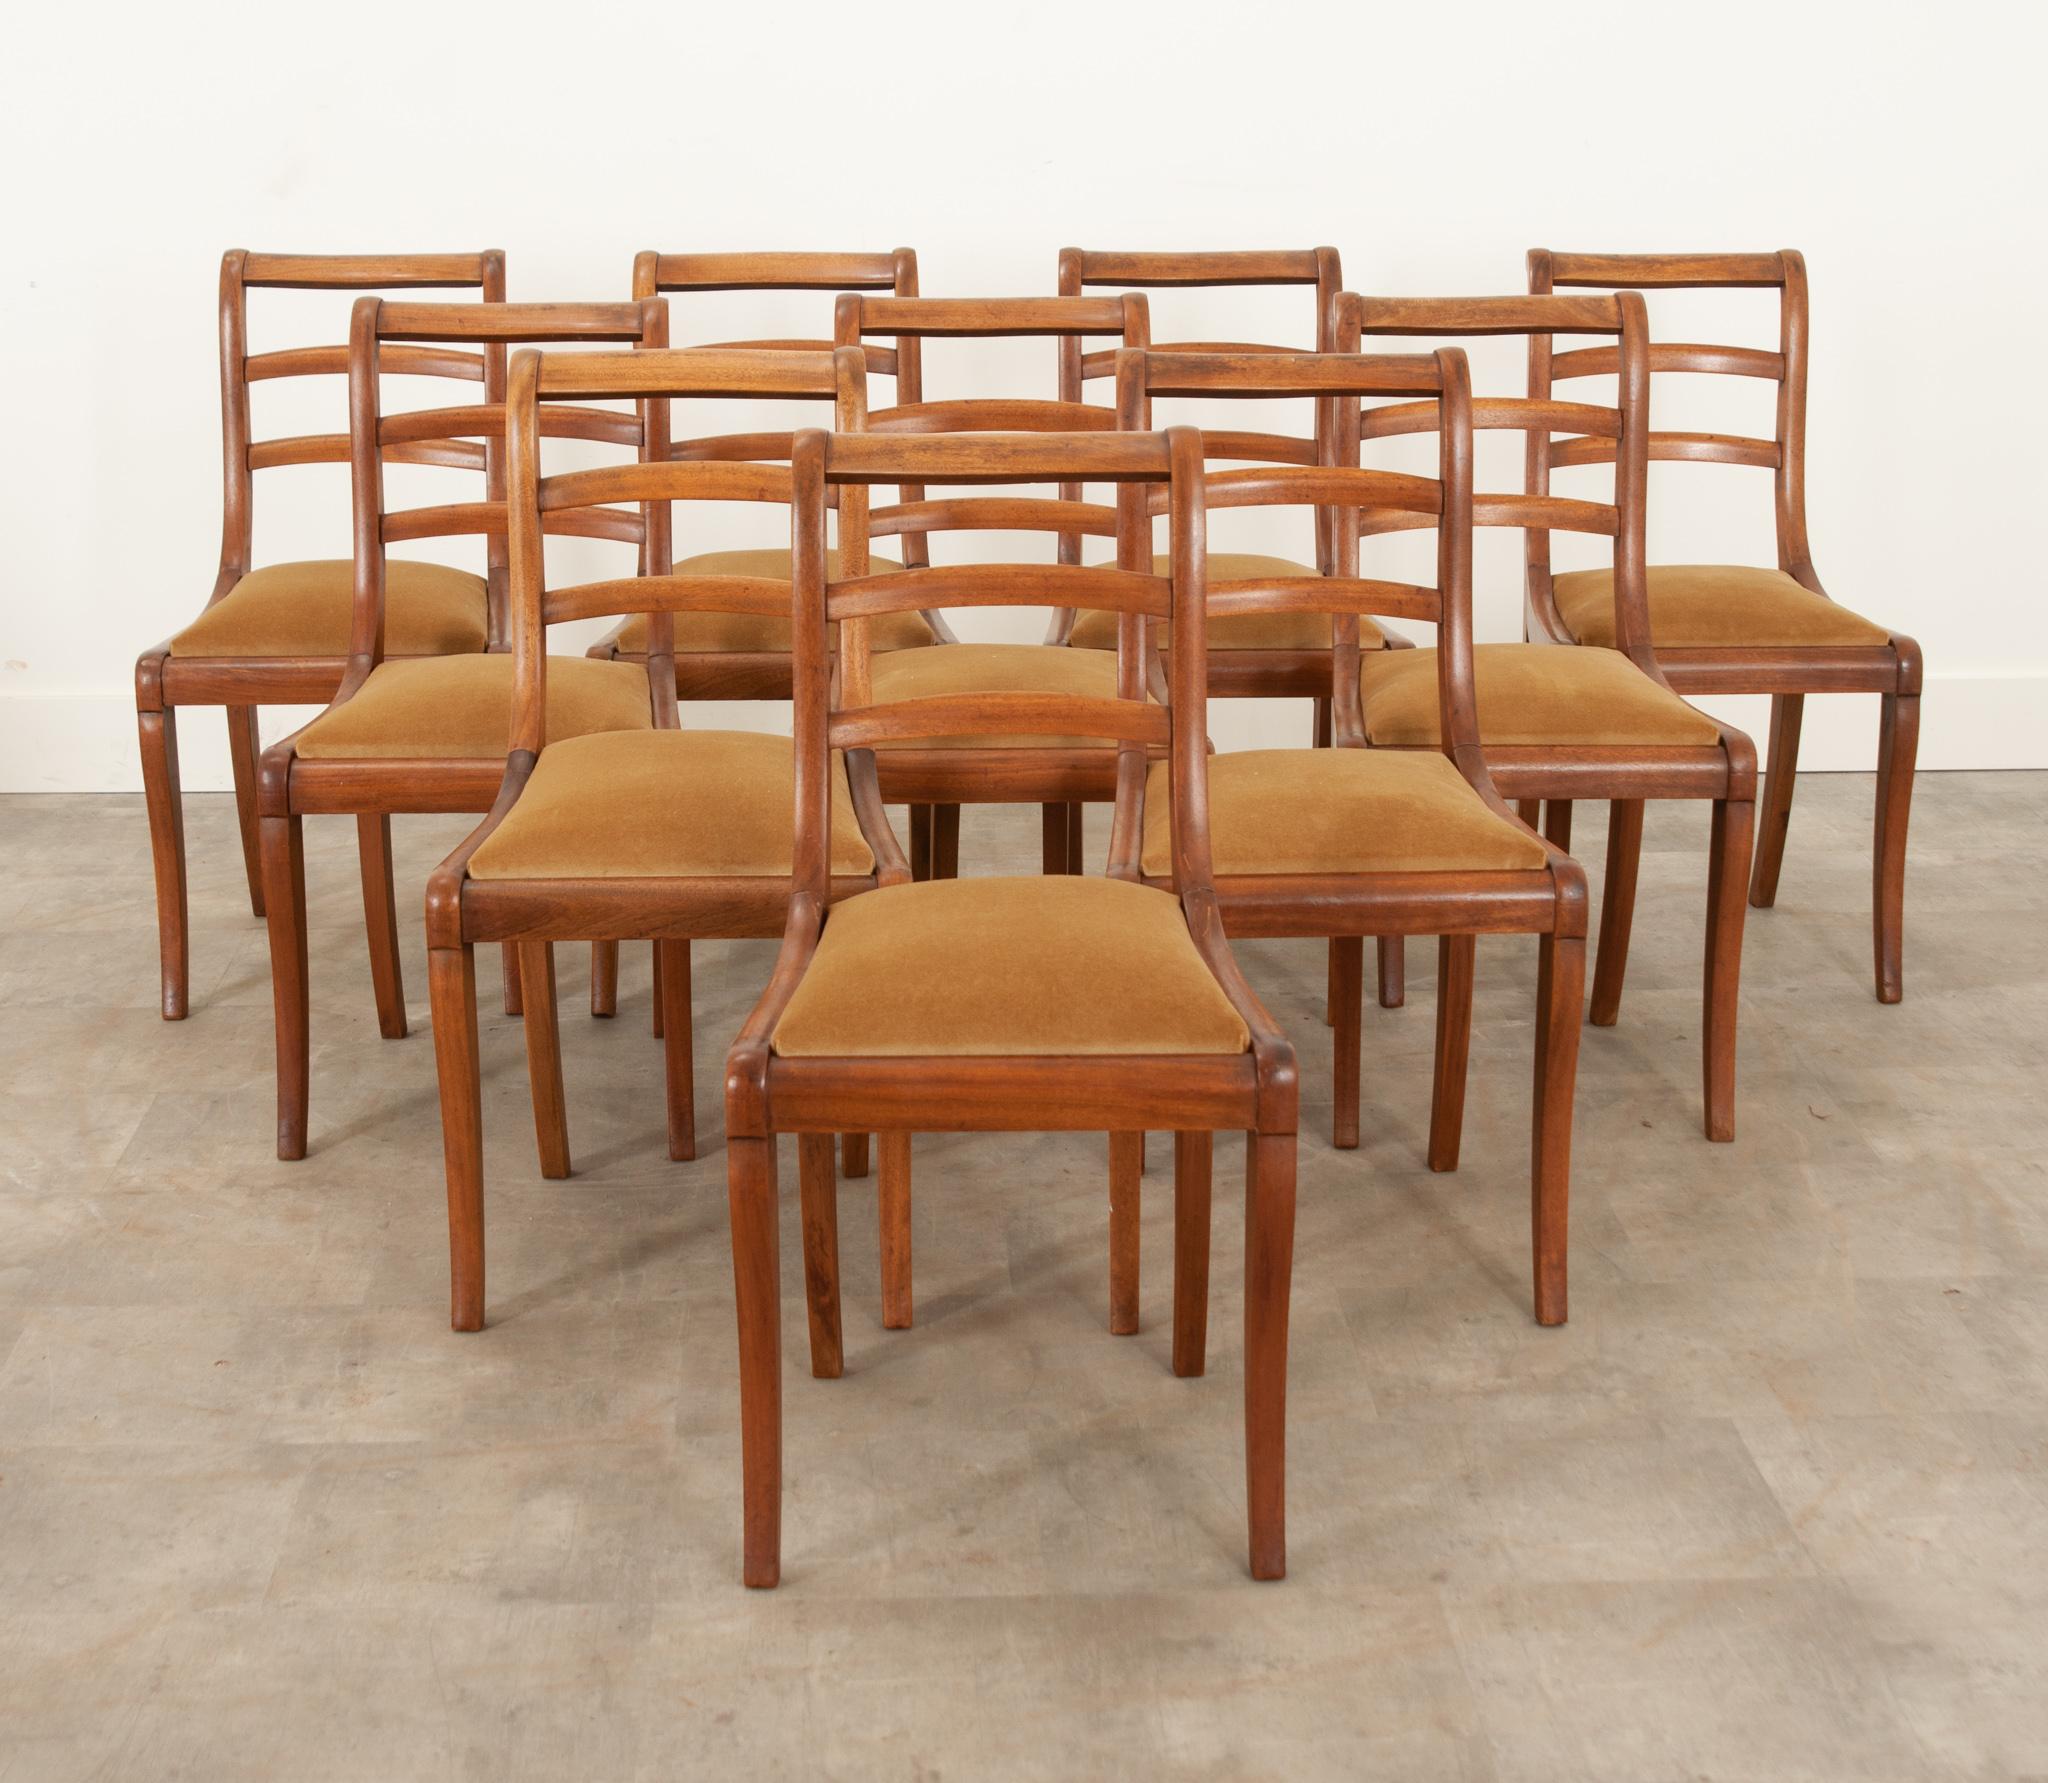 We love this set of 10 mahogany dining chairs from France. Recently reupholstered in a velvet from Schumacher, the warm fabric complements the rich coloring of solid wood frames, and is designed to be stain and scratch resistant. The back support is